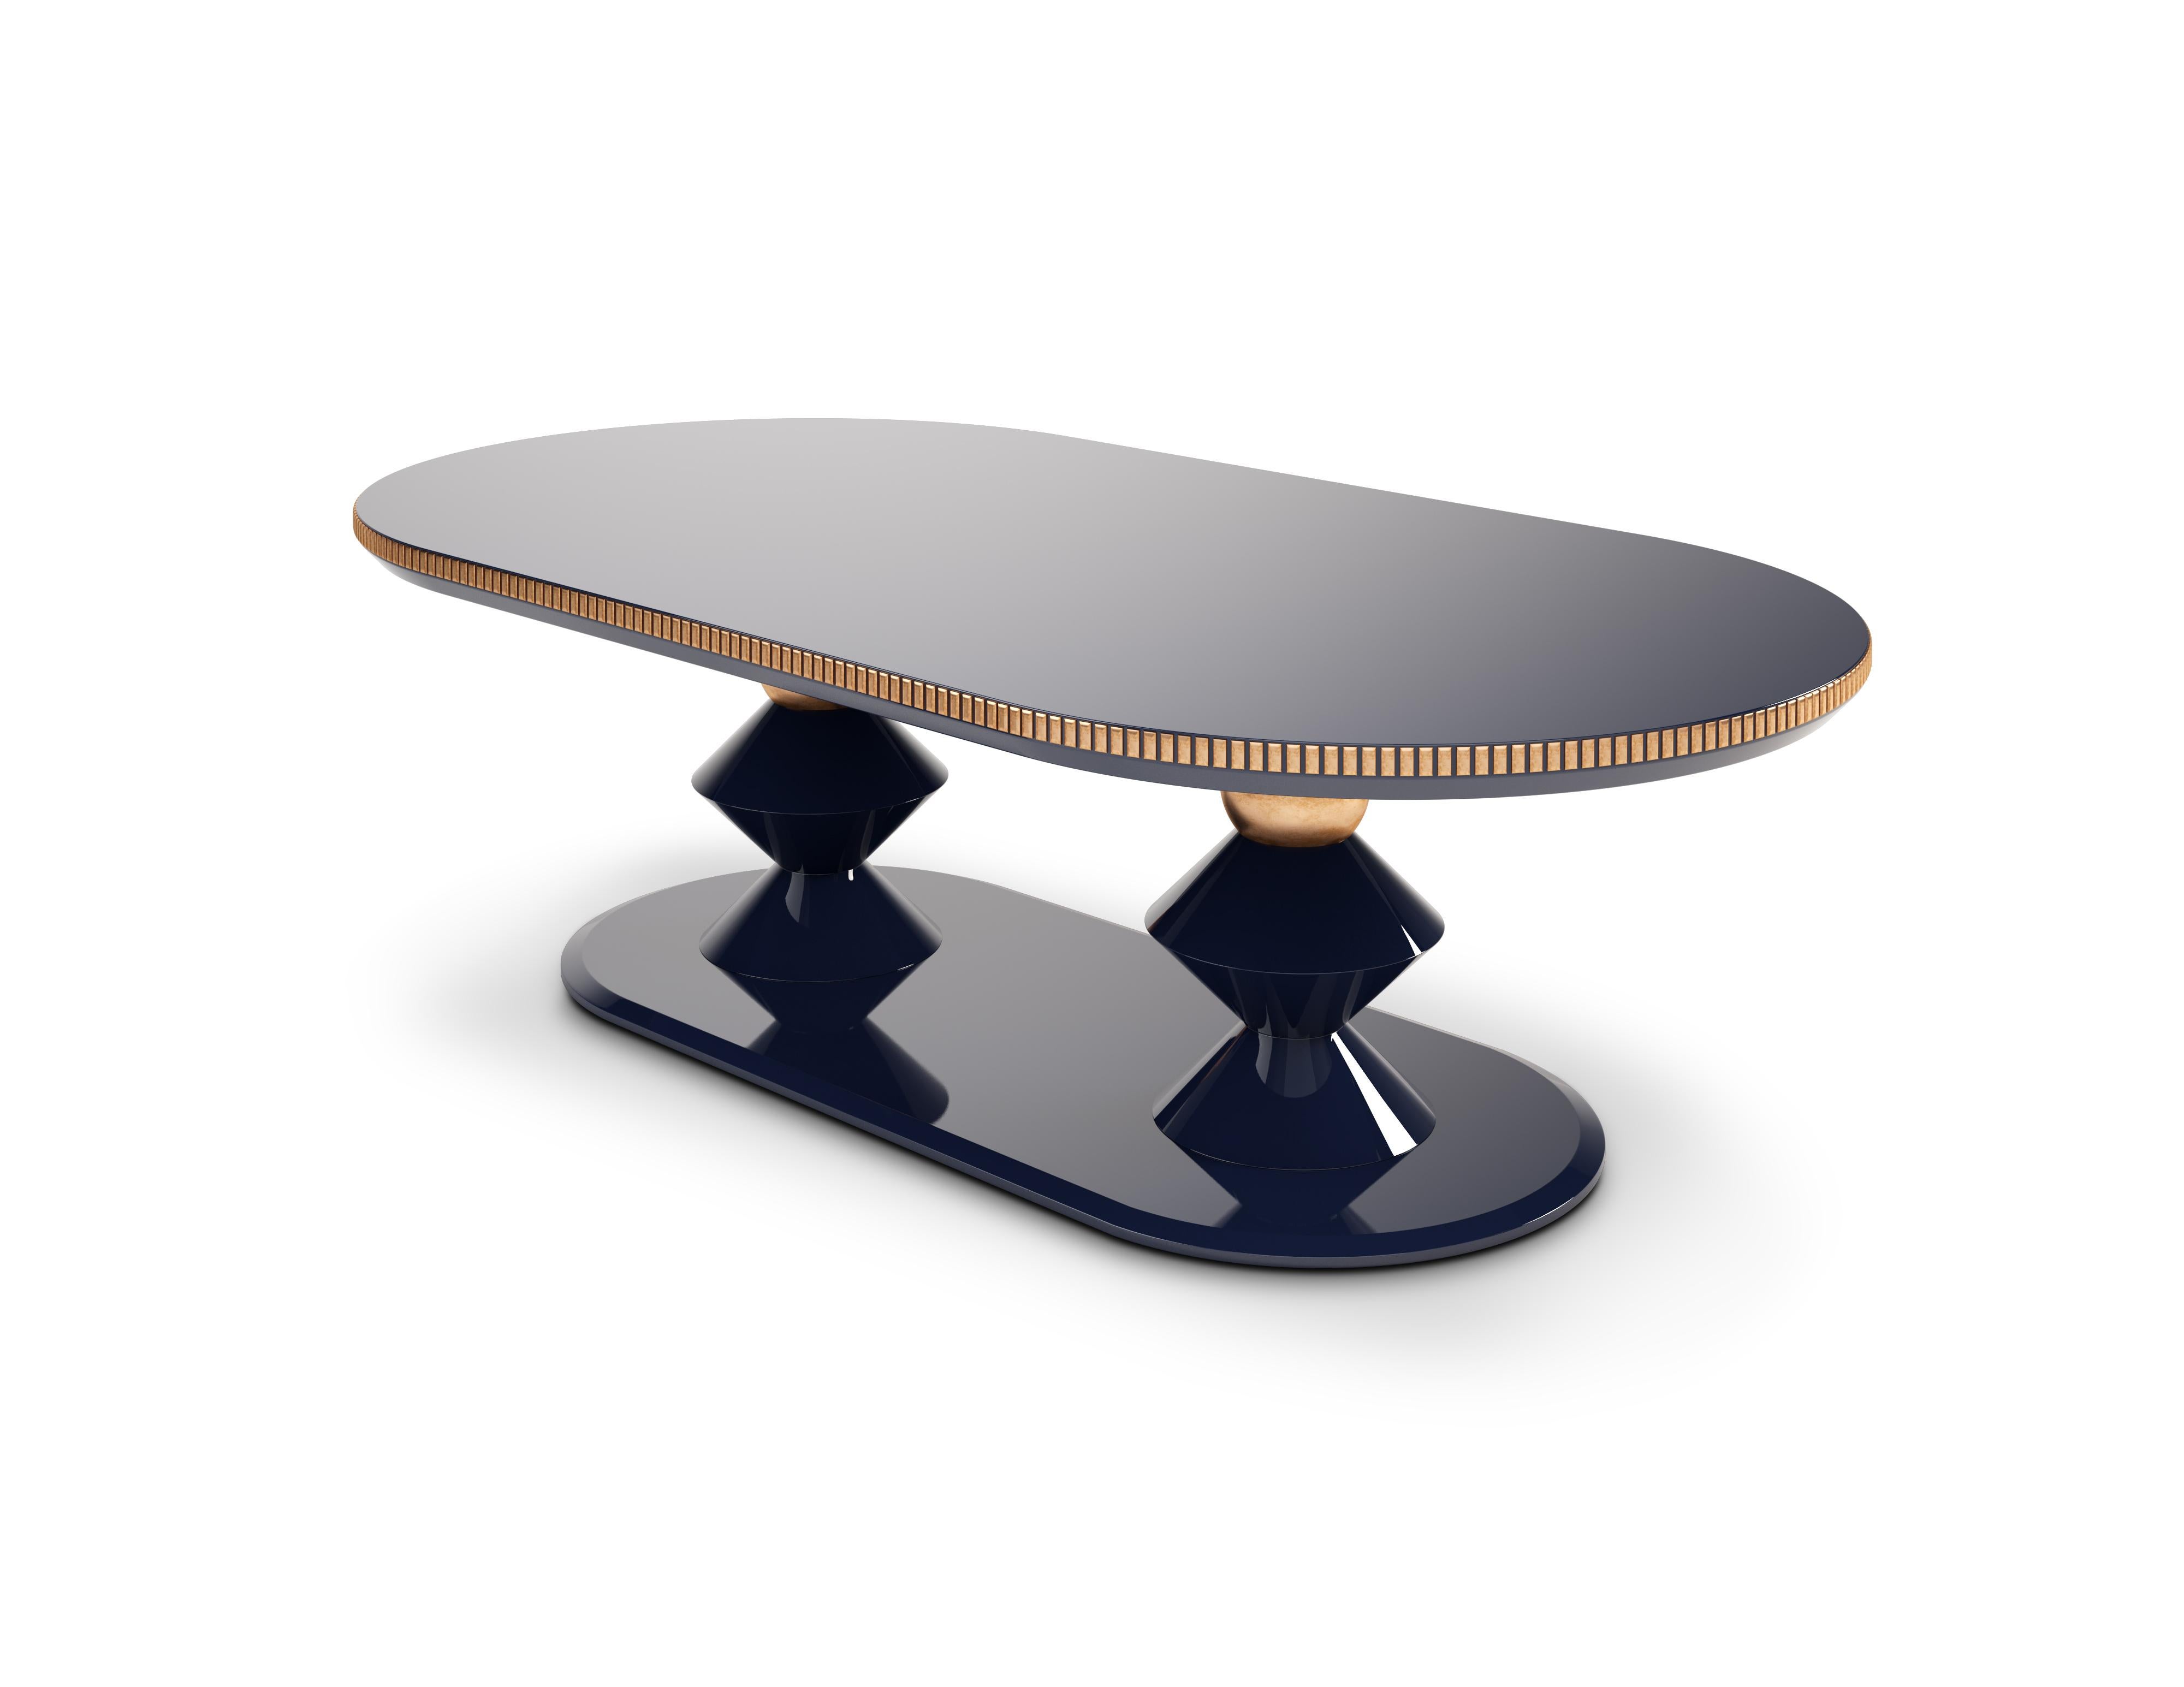 Elegant and simply described as the bastion of Portuguese luxury, the Cortez modern dining table exhales the splendor of the uniqueness of the kings and queens’ era. Its timeless originality and imperial design were inspired by the Palace of Ajuda,